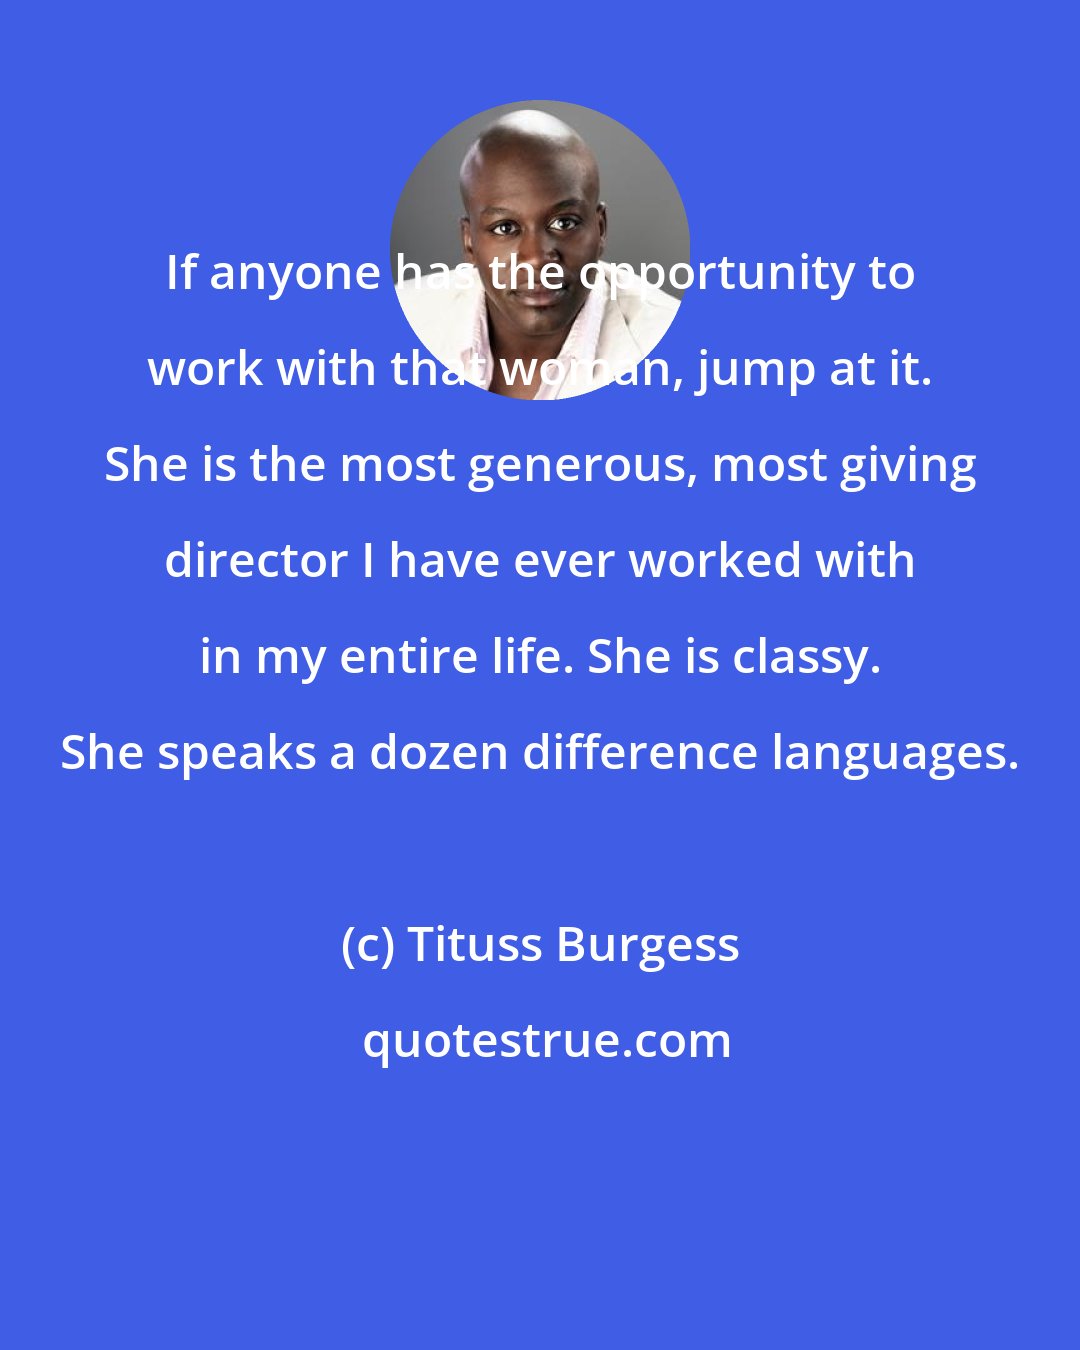 Tituss Burgess: If anyone has the opportunity to work with that woman, jump at it. She is the most generous, most giving director I have ever worked with in my entire life. She is classy. She speaks a dozen difference languages.